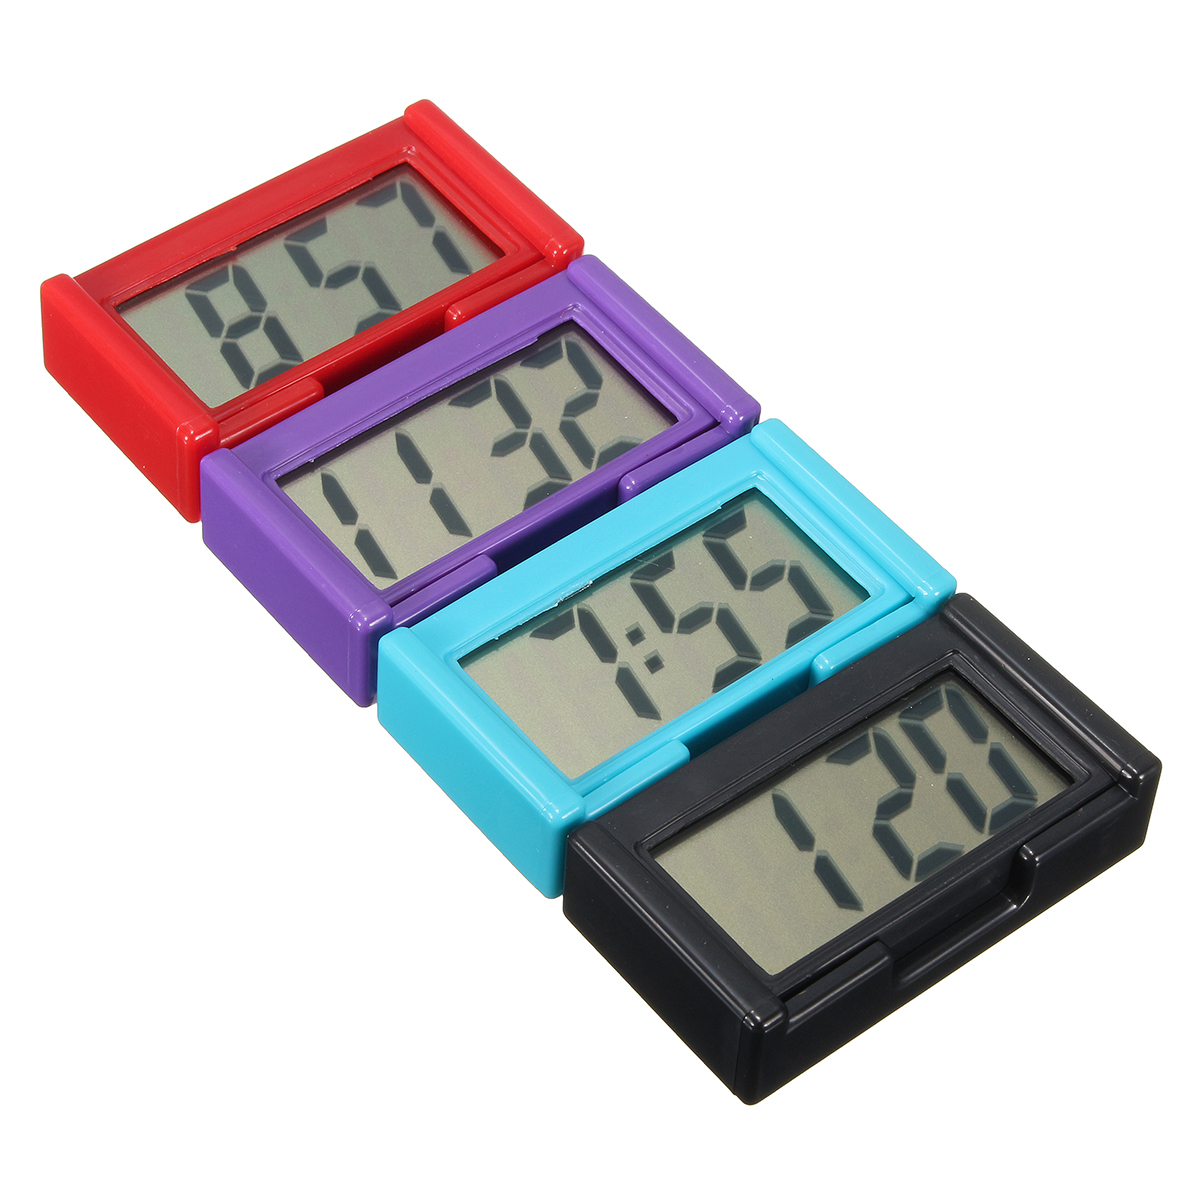 4 Colors Automotive Digital Car LCD Clock Self-Adhesive Stick On Time Portable 1